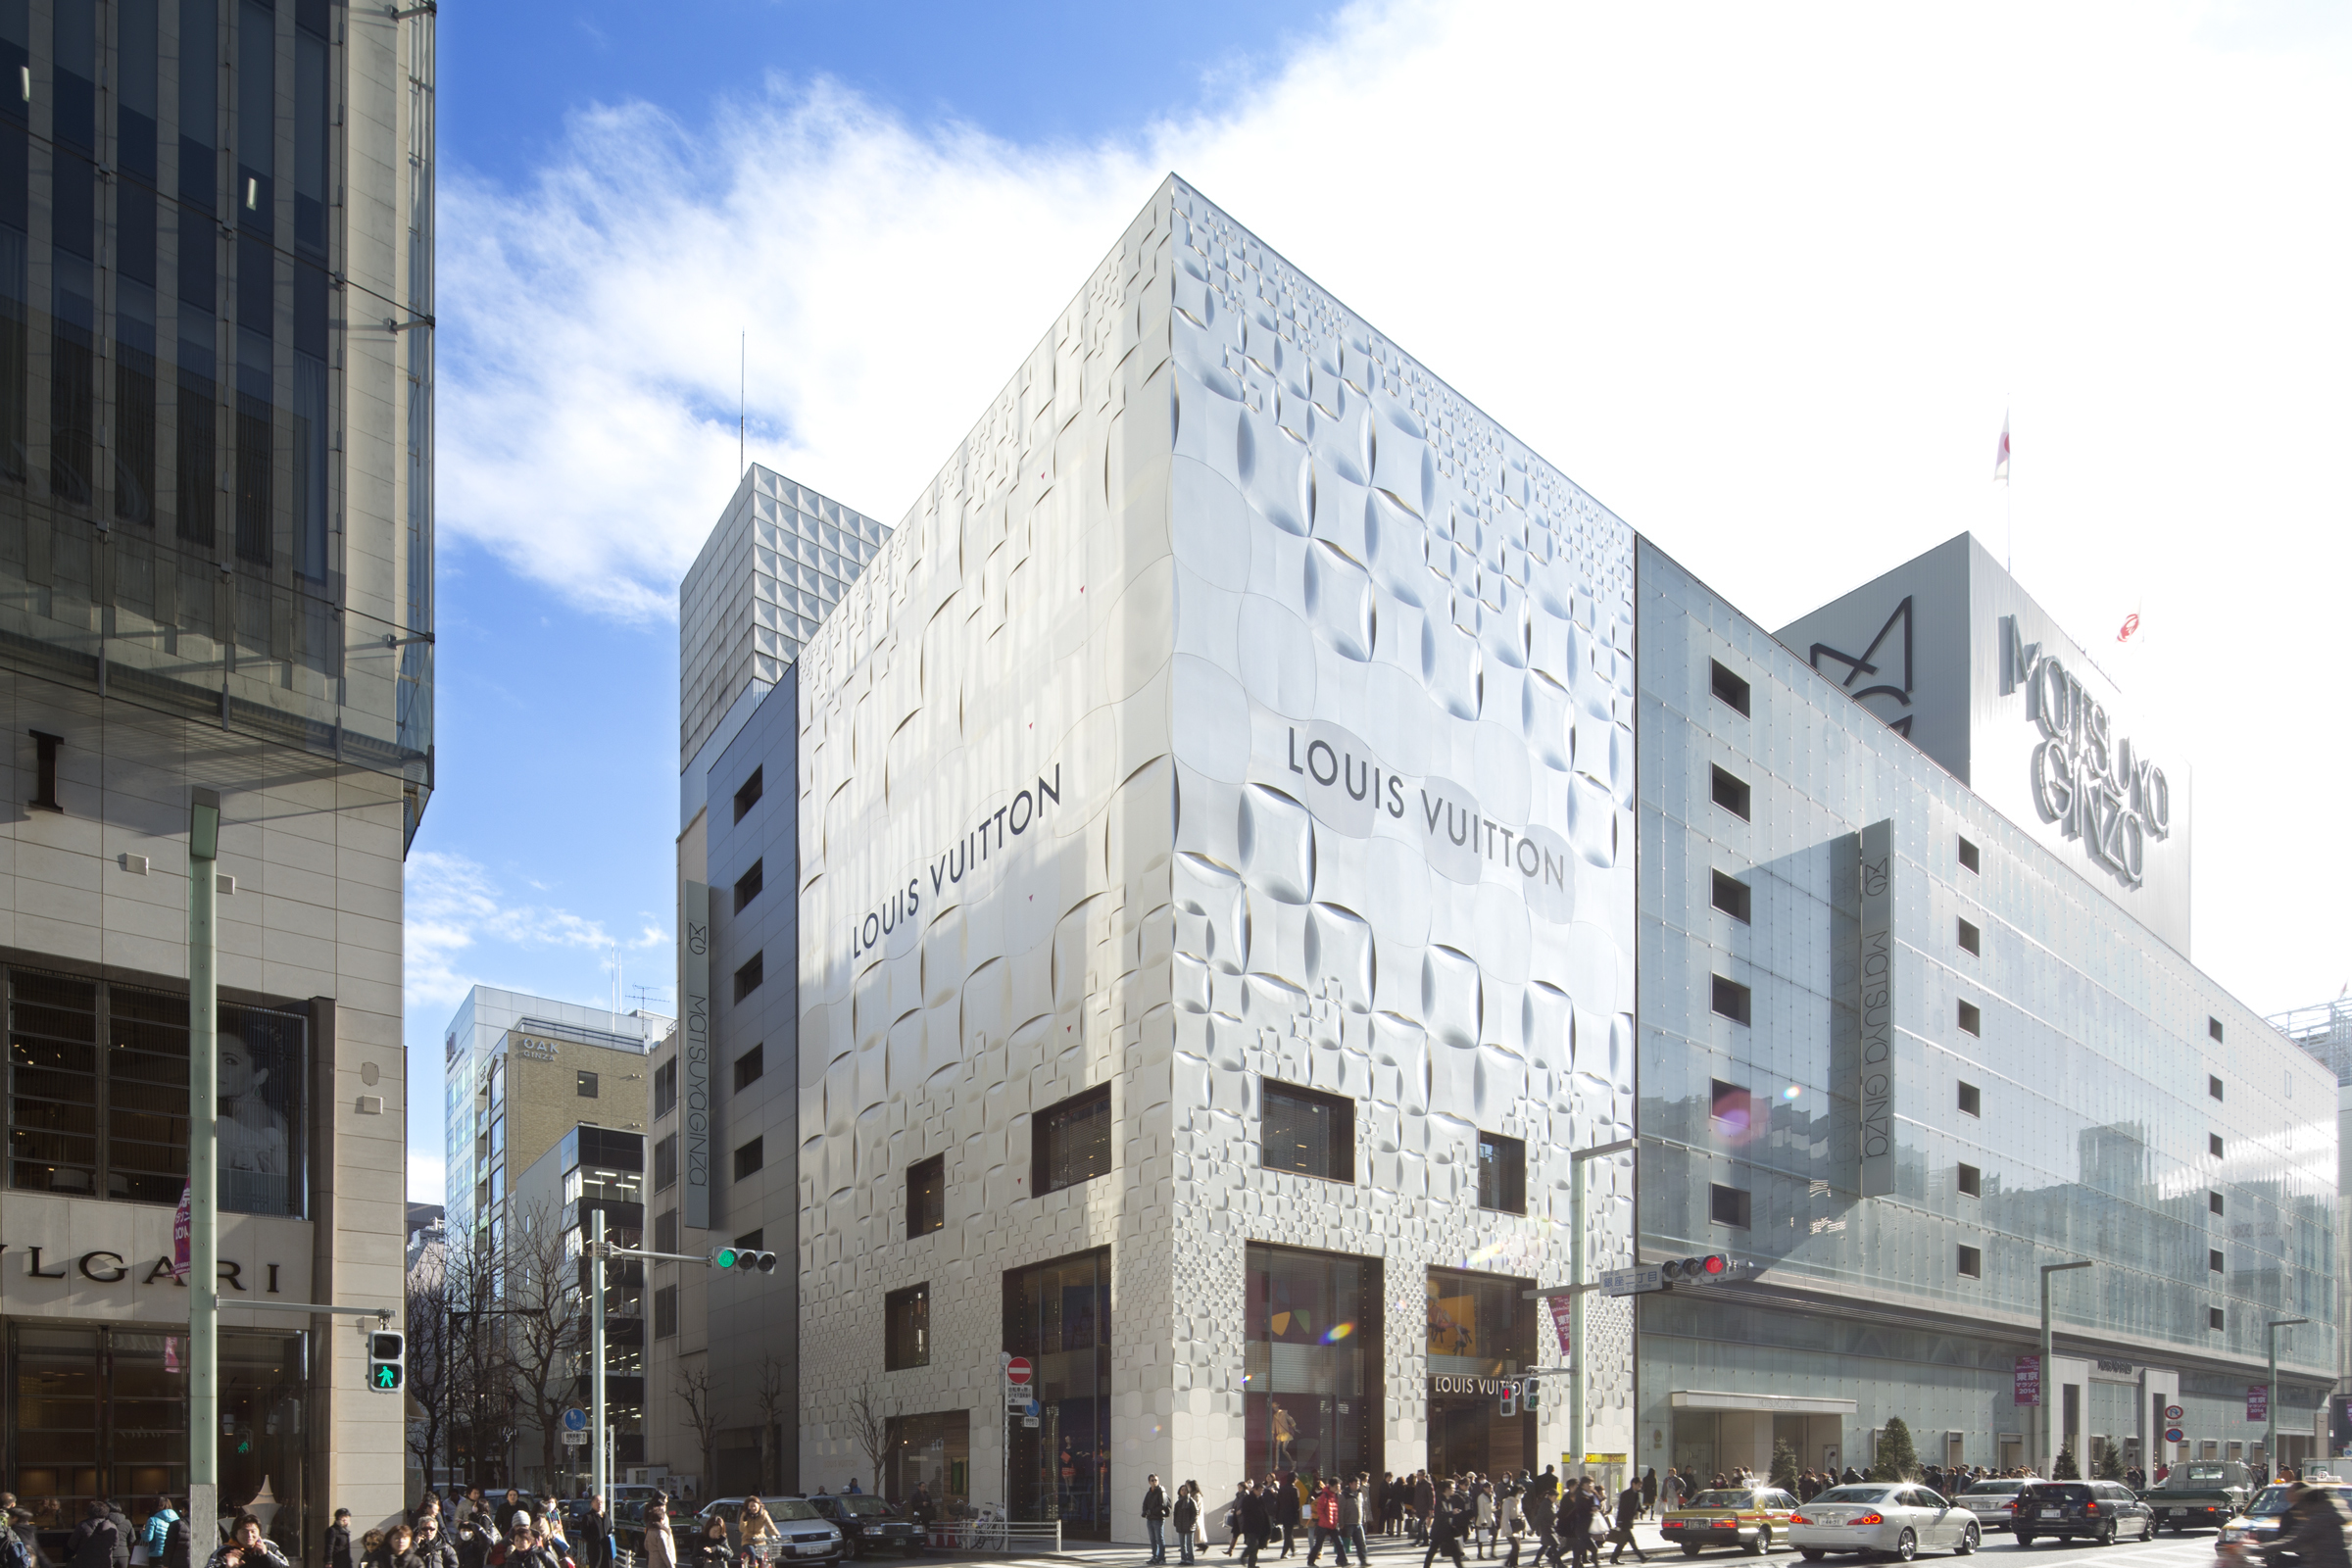 Louis Vuitton and Matsuya Ginza stores in Ginza district in Tokyo